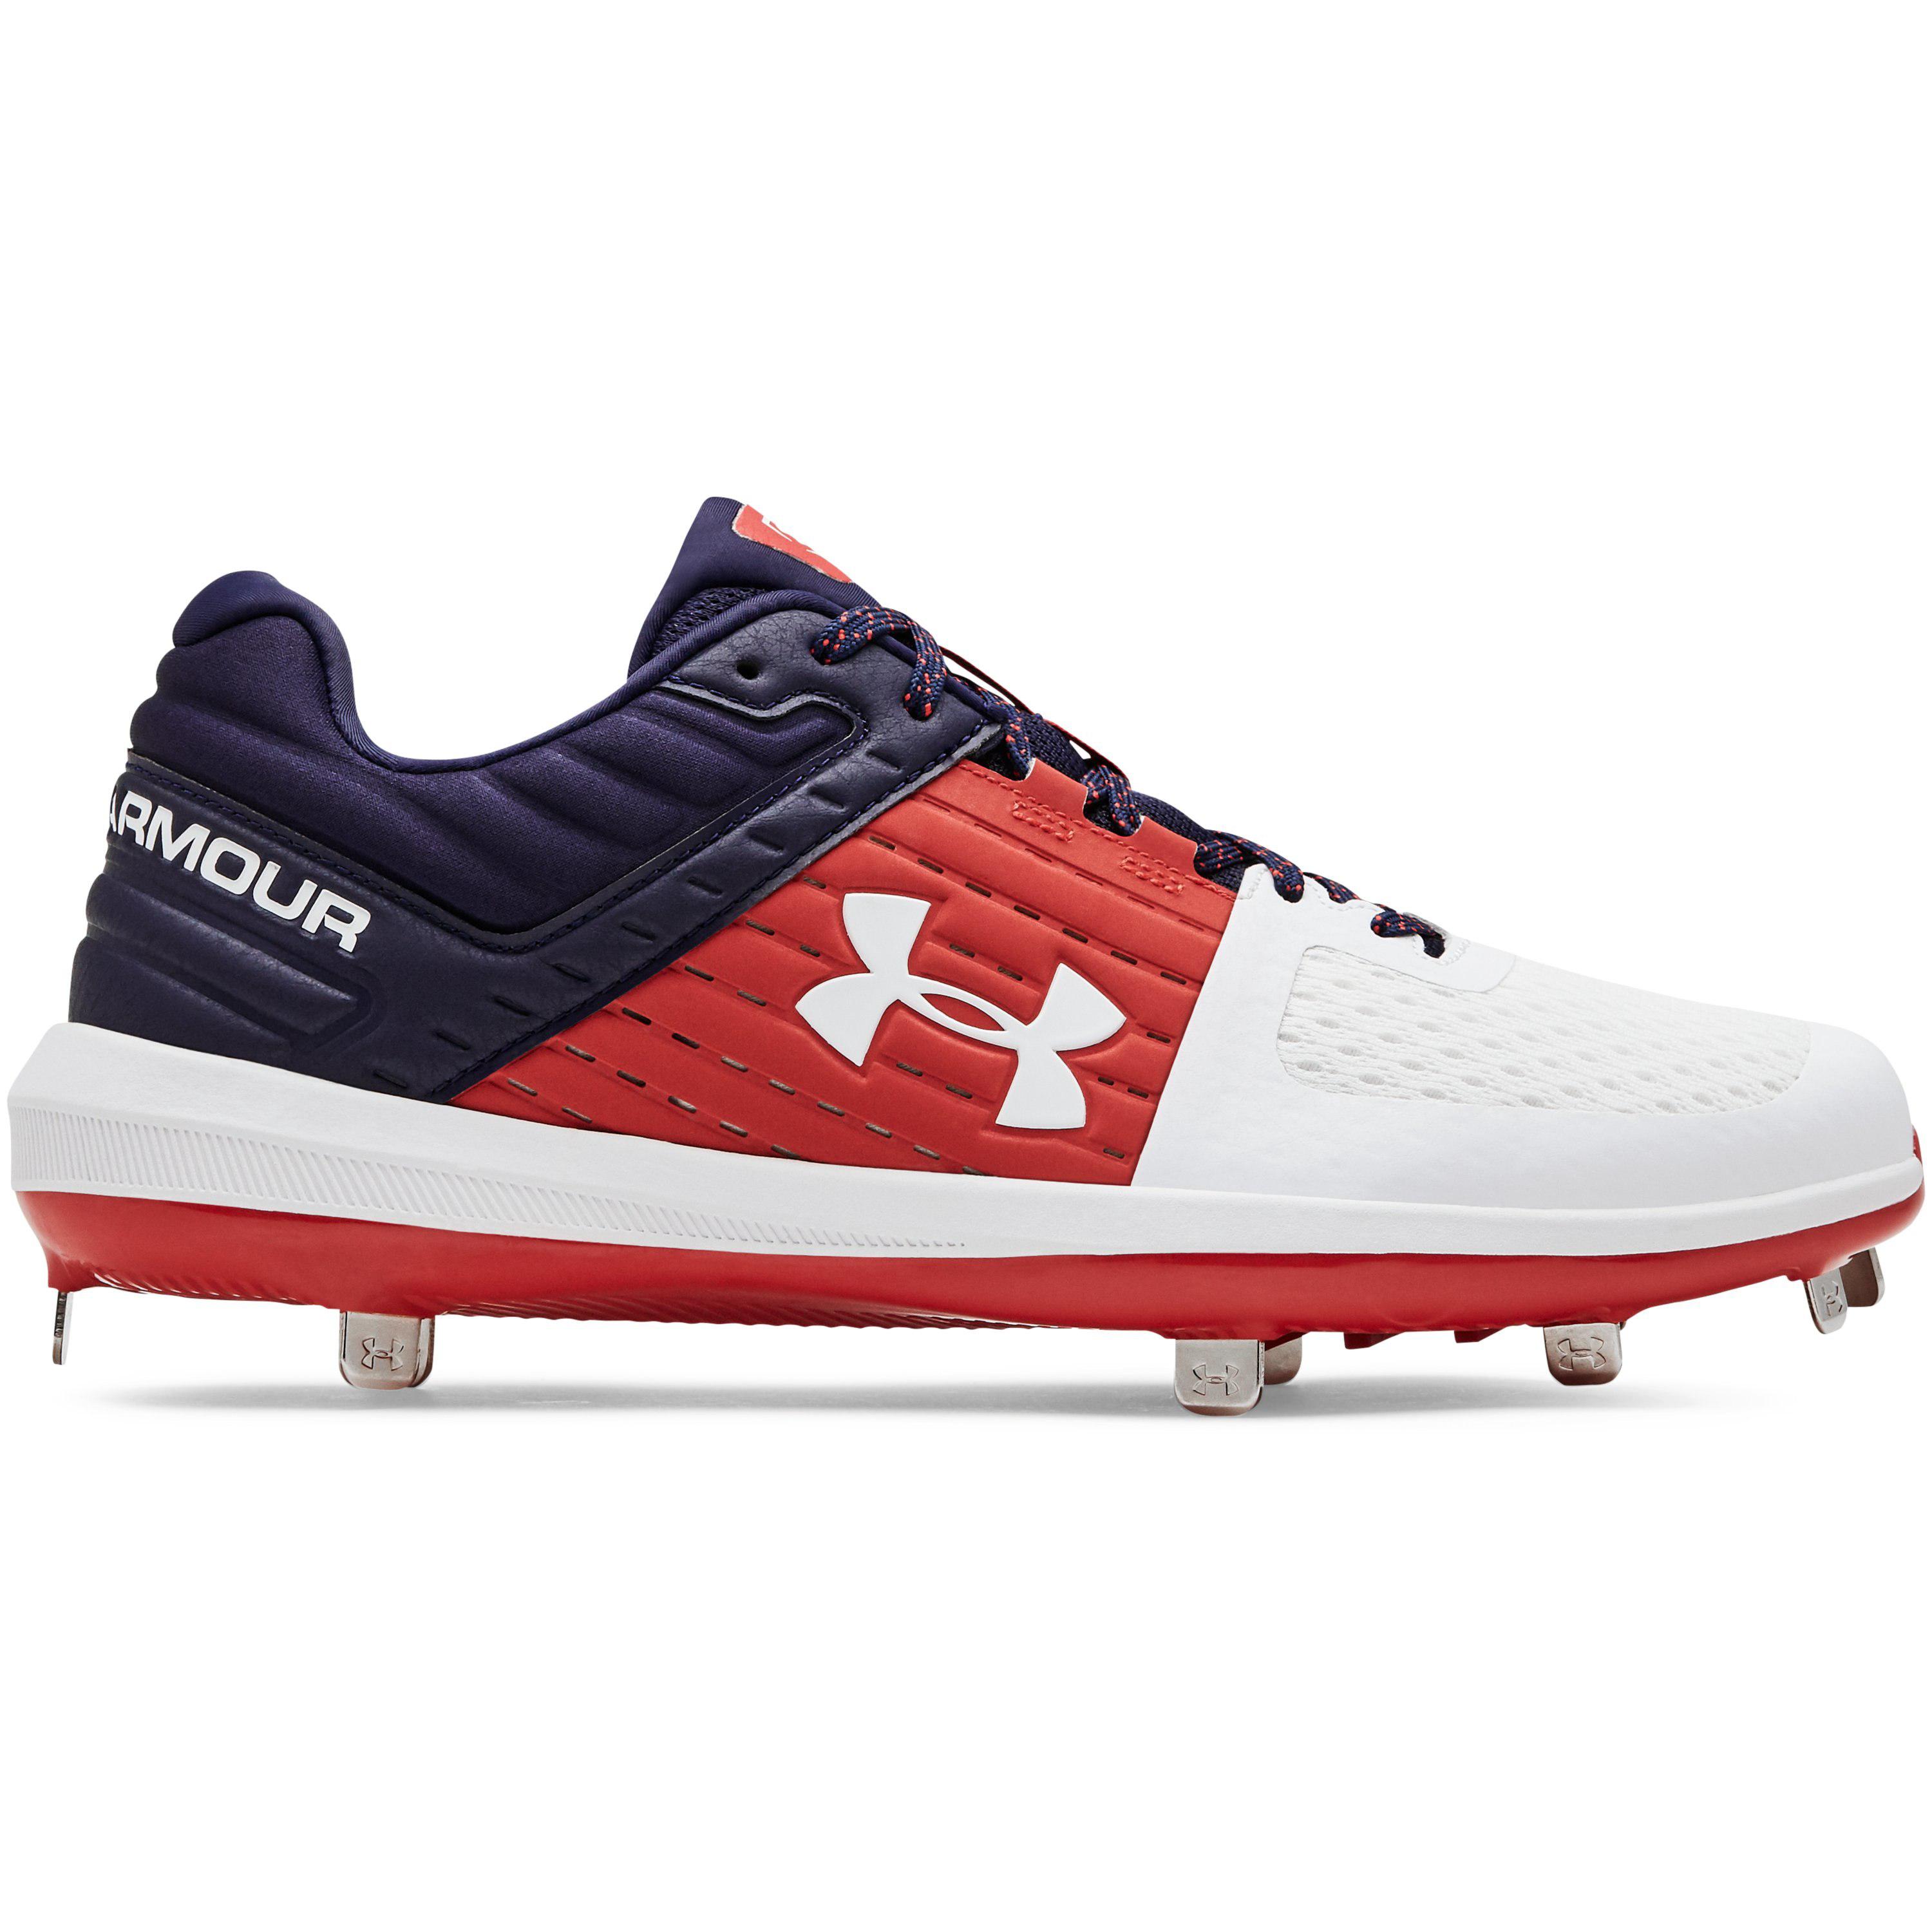 Under Armour Yard Low ST Baseball Cleats Navy/White 3021711-402 